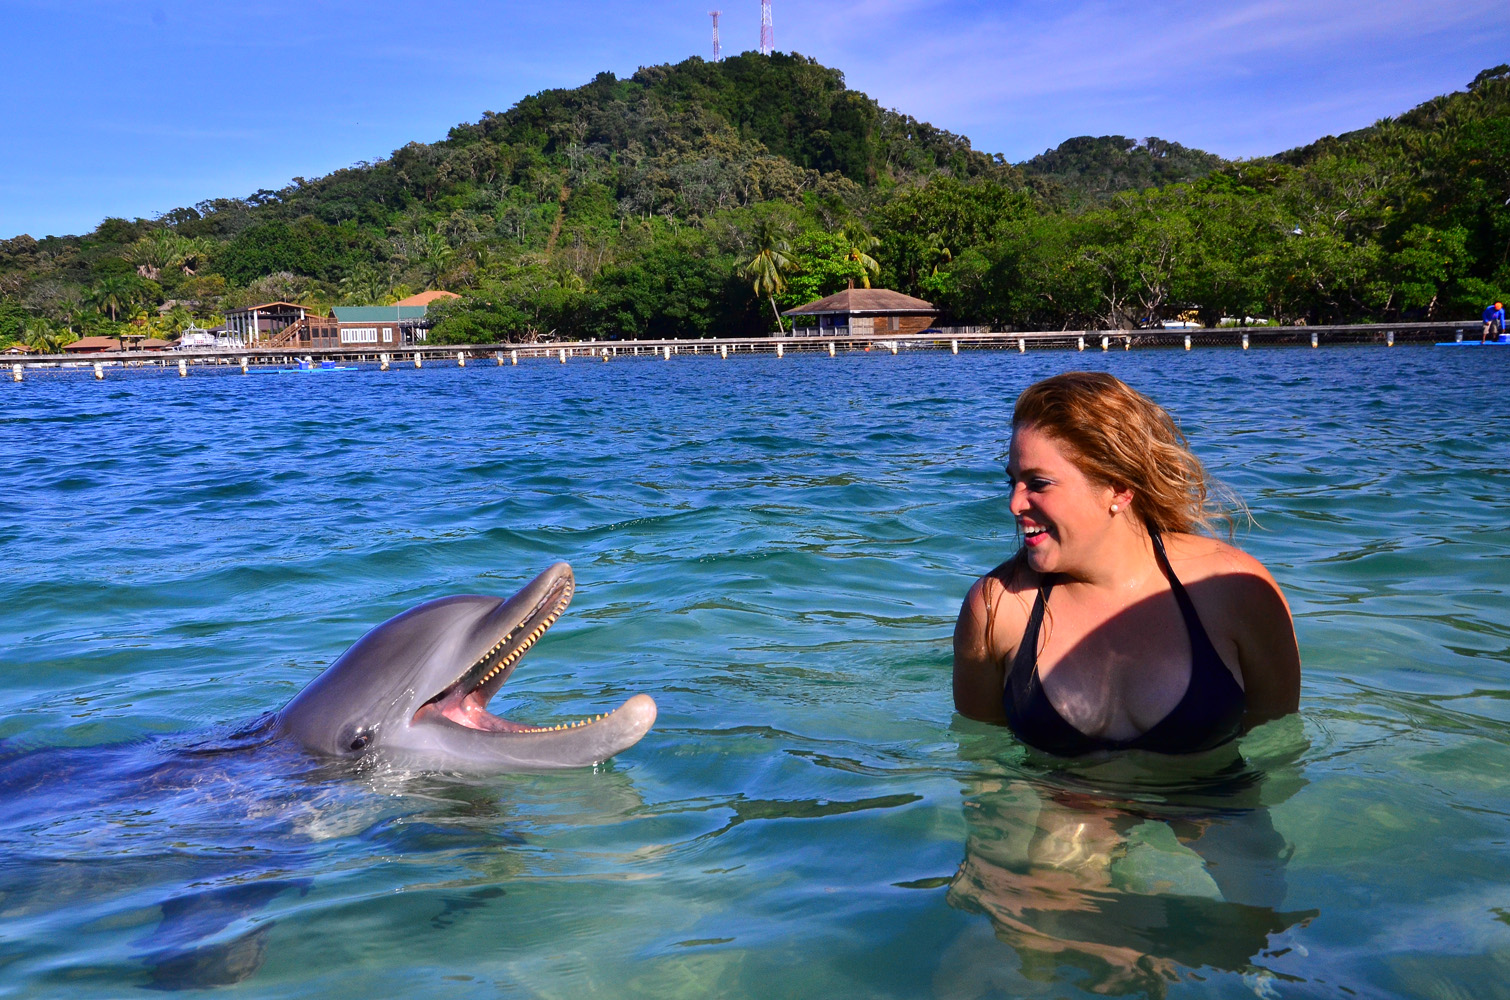 Day 5. Laughing with a dolphin!